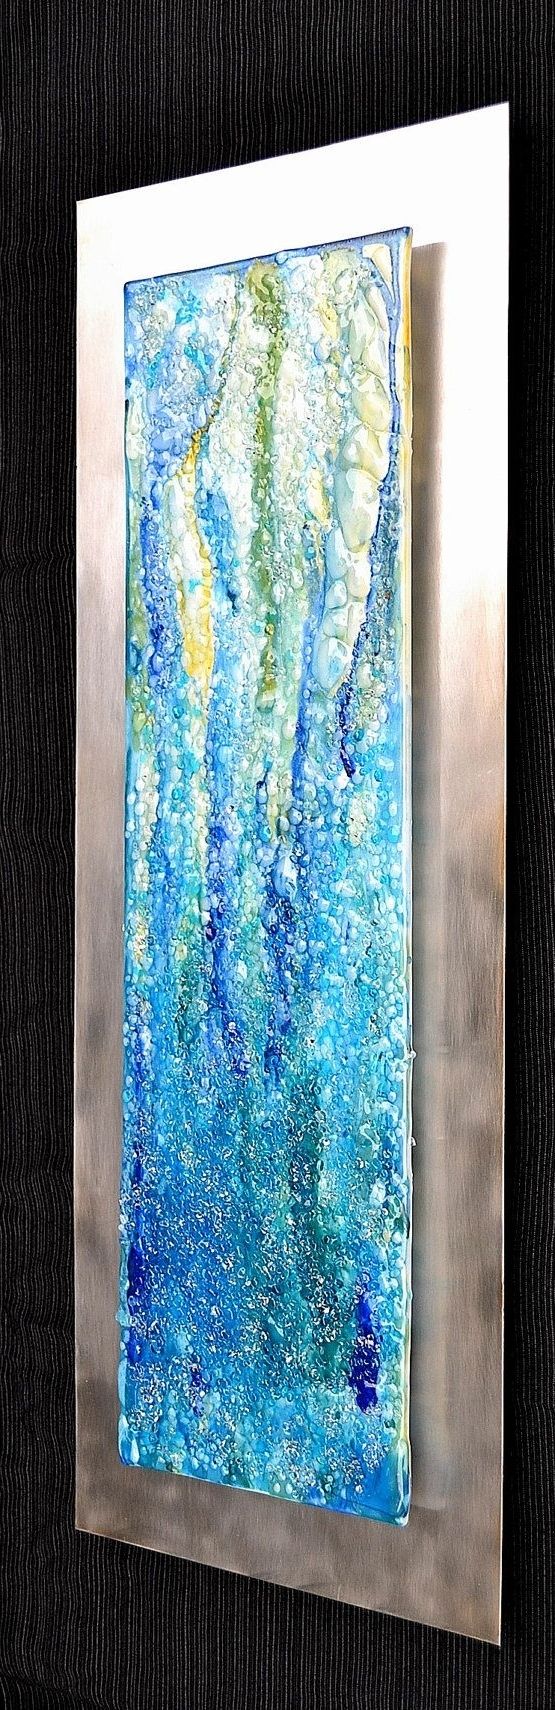 Newest Fused Glass Wall Art By Frank Thompson Within Waterfall – Modern Fused Glass Wall Hanging Art On Stainless Steel (View 5 of 15)